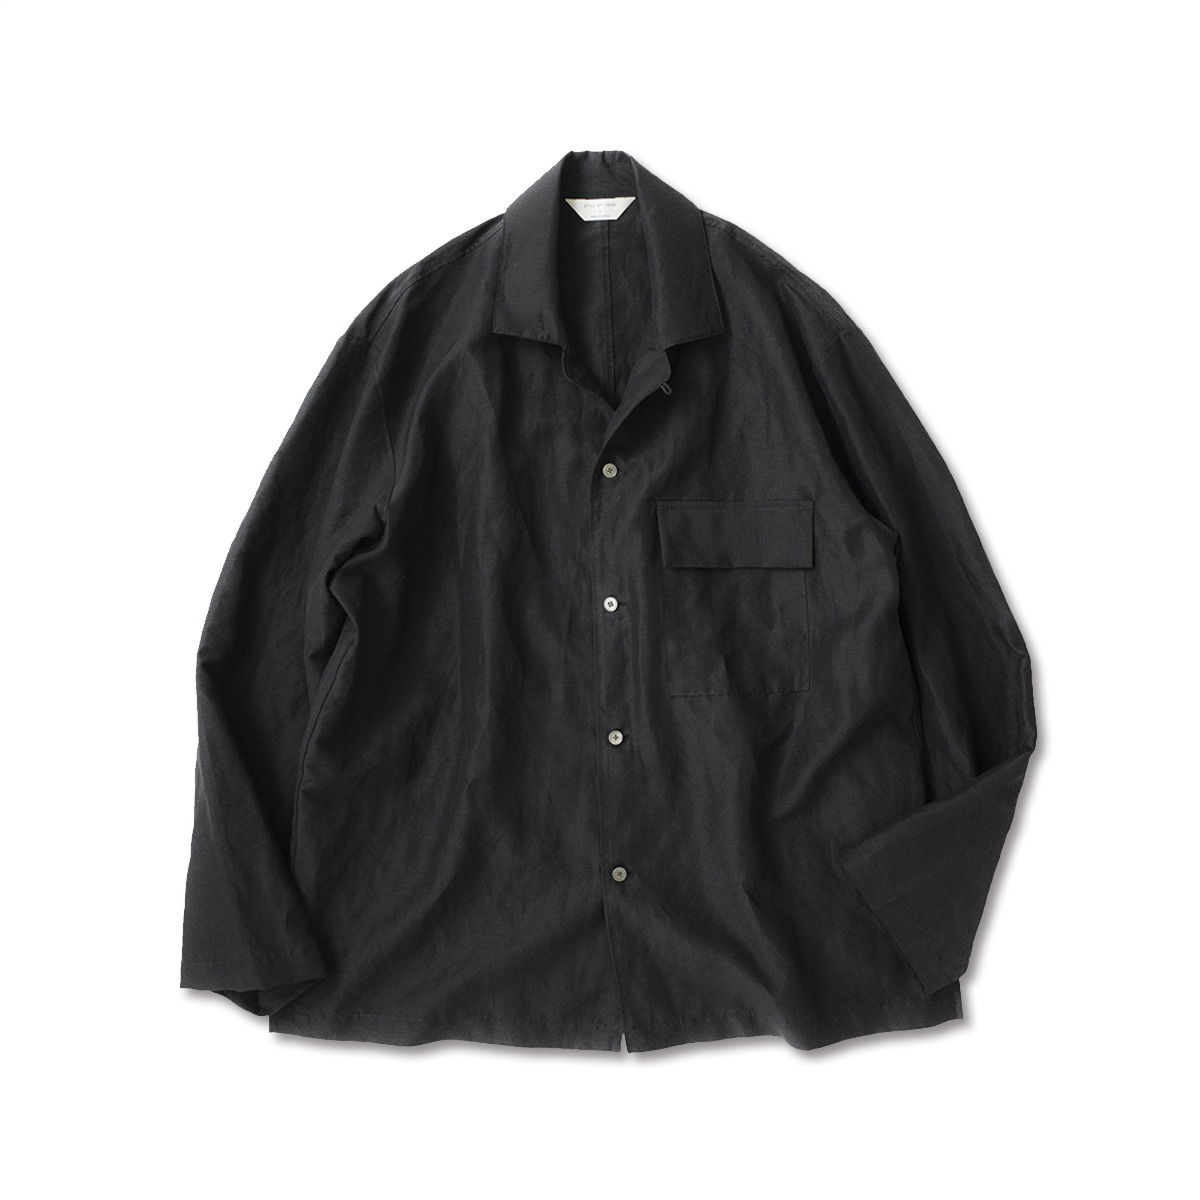 [STILL BY HAND] BL03211 OPEN COLLAR COVERALL &#039;BLACK&#039;